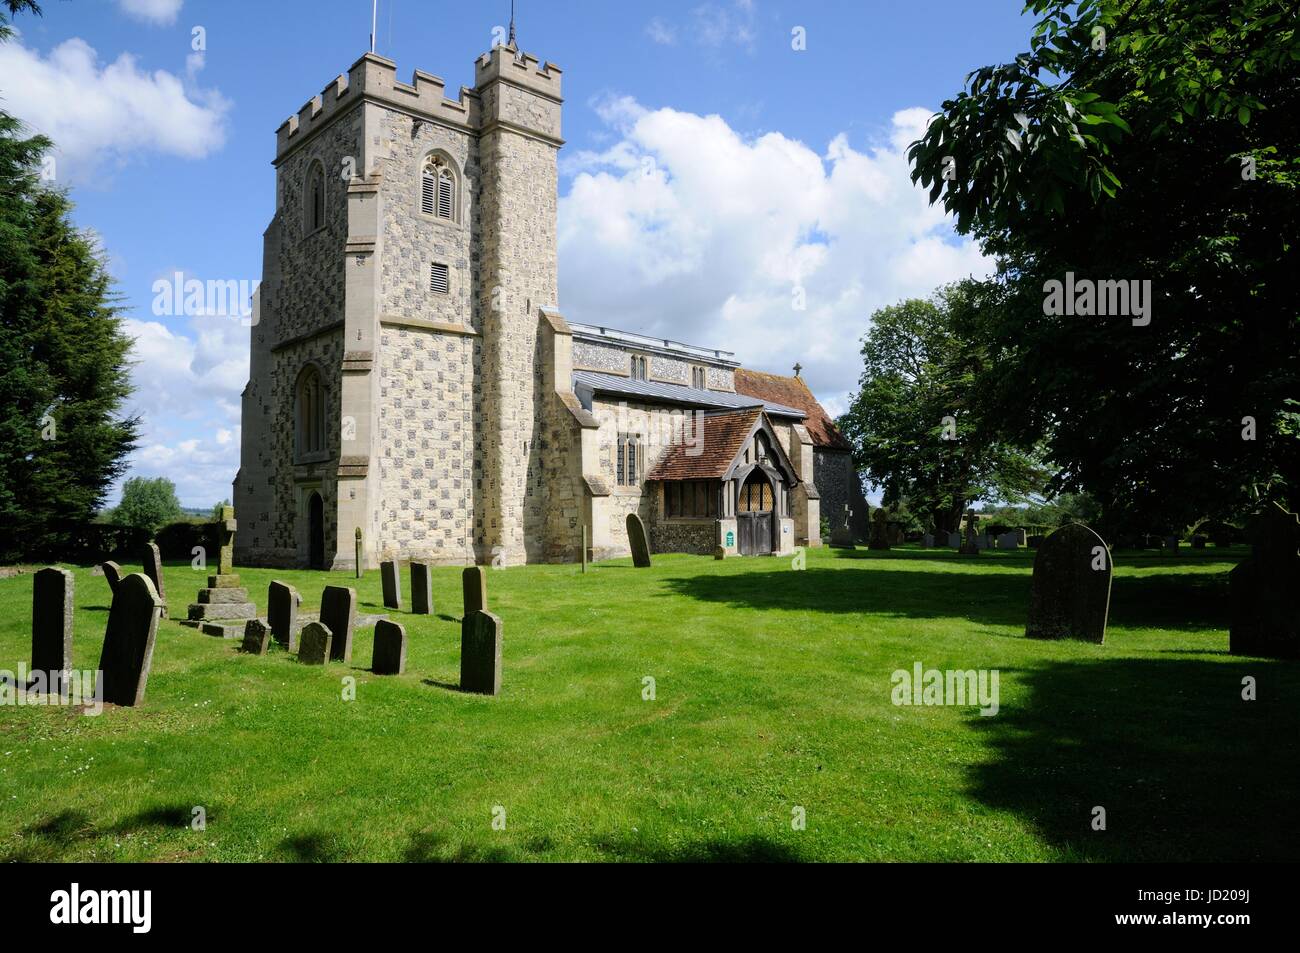 St Mary's, Puttenham, Hertfordshire is a beautiful medieval church in a picturesque location. Puttenham is one of the Thankful Villages Stock Photo